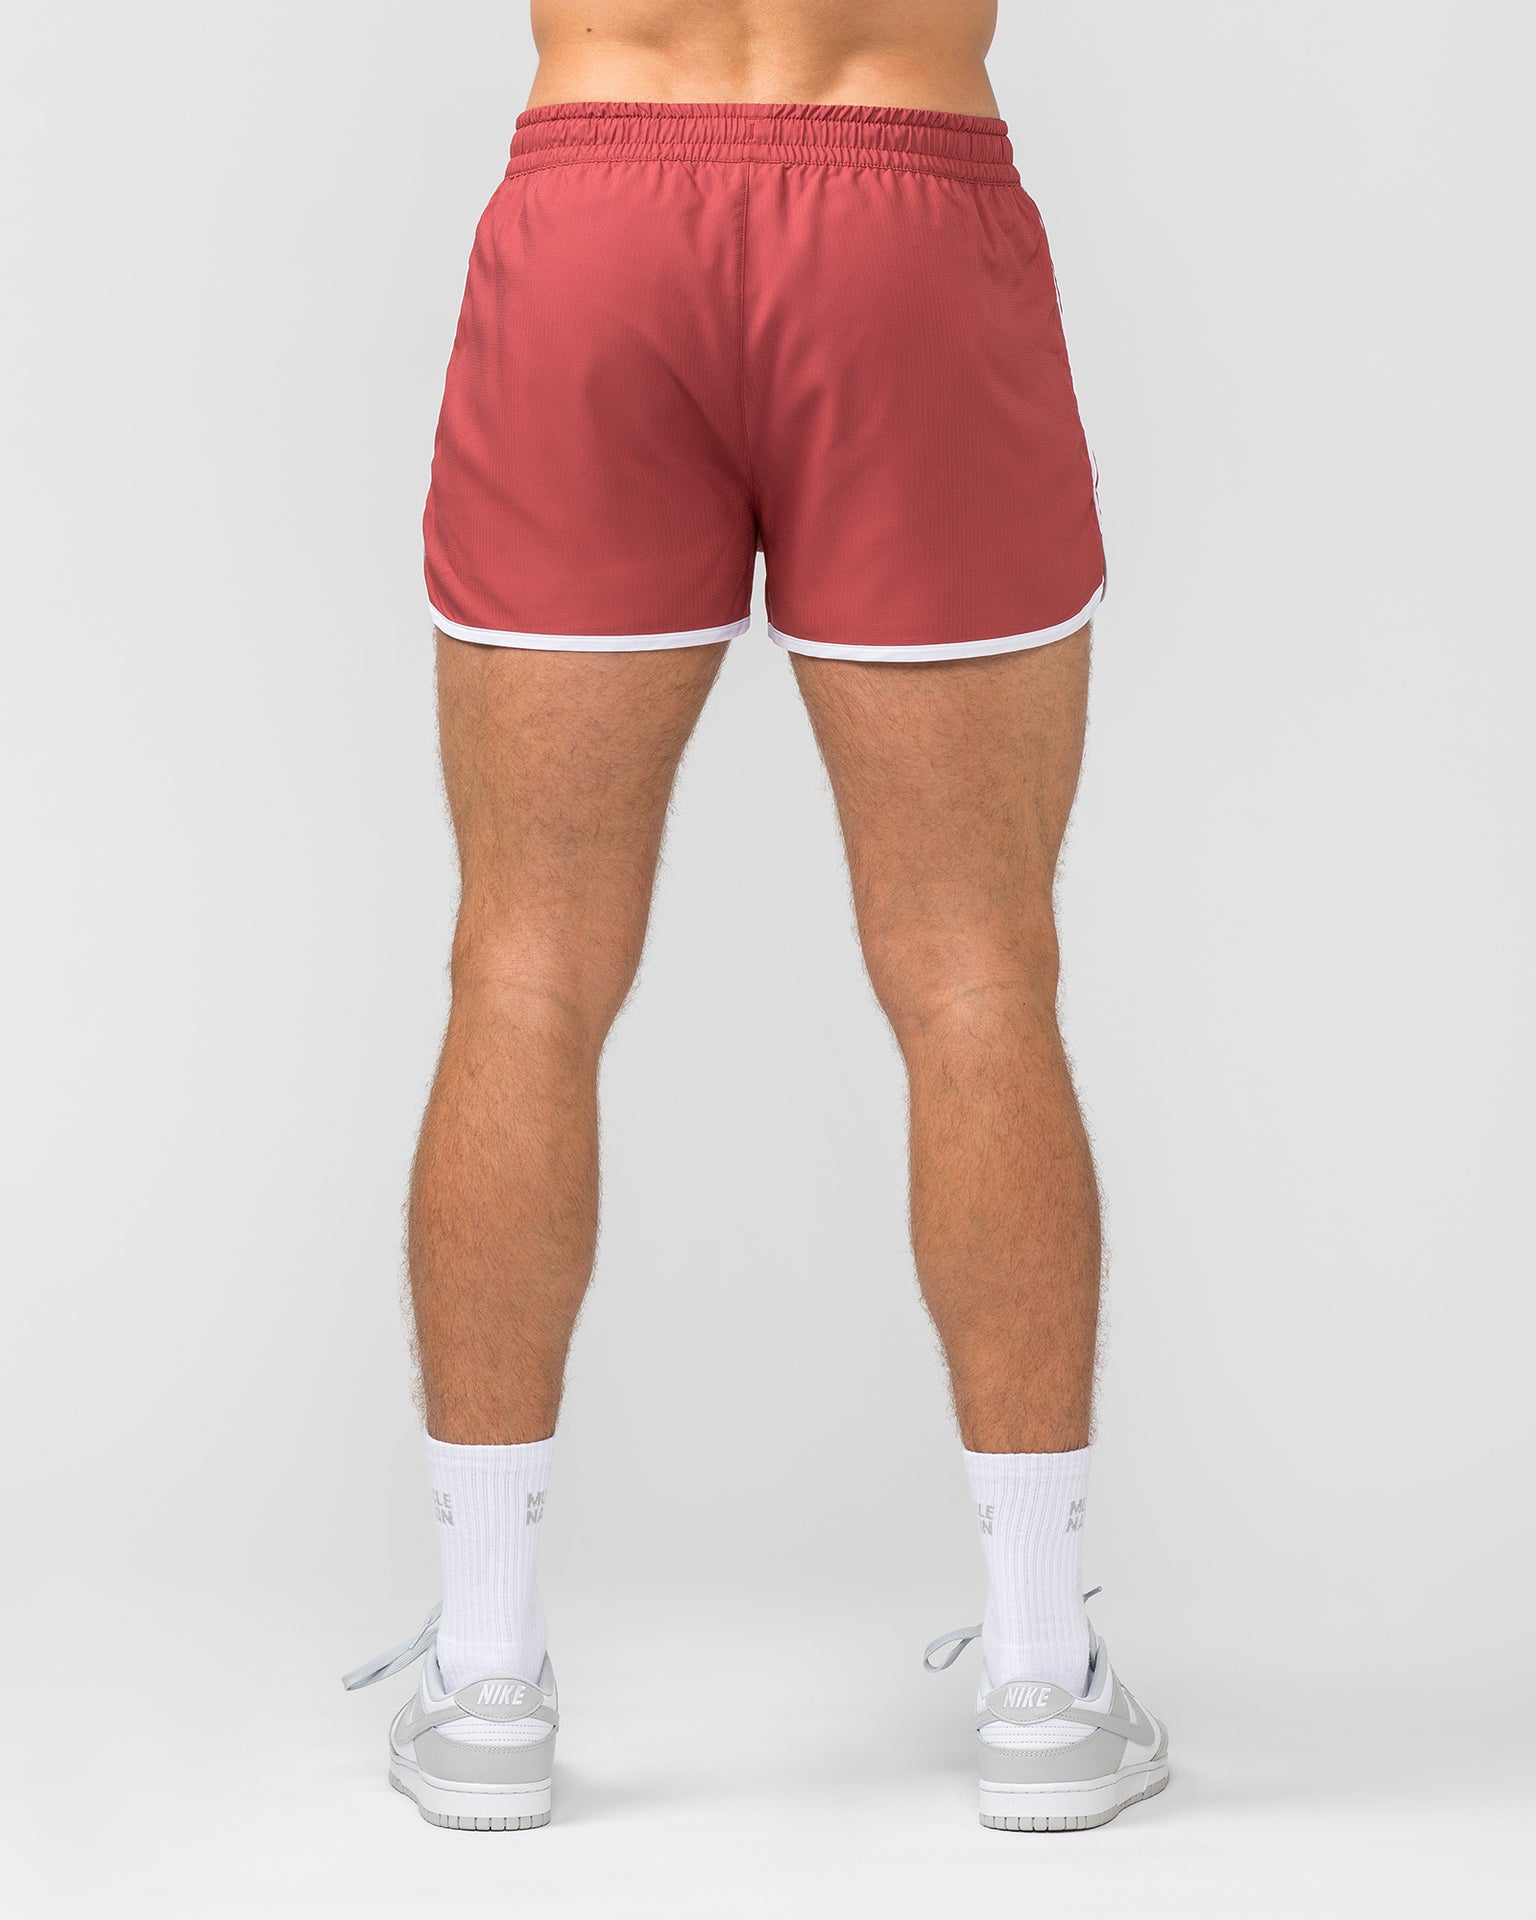 Muscle Nation Gym Shorts Retro Shorts - Dusty Red